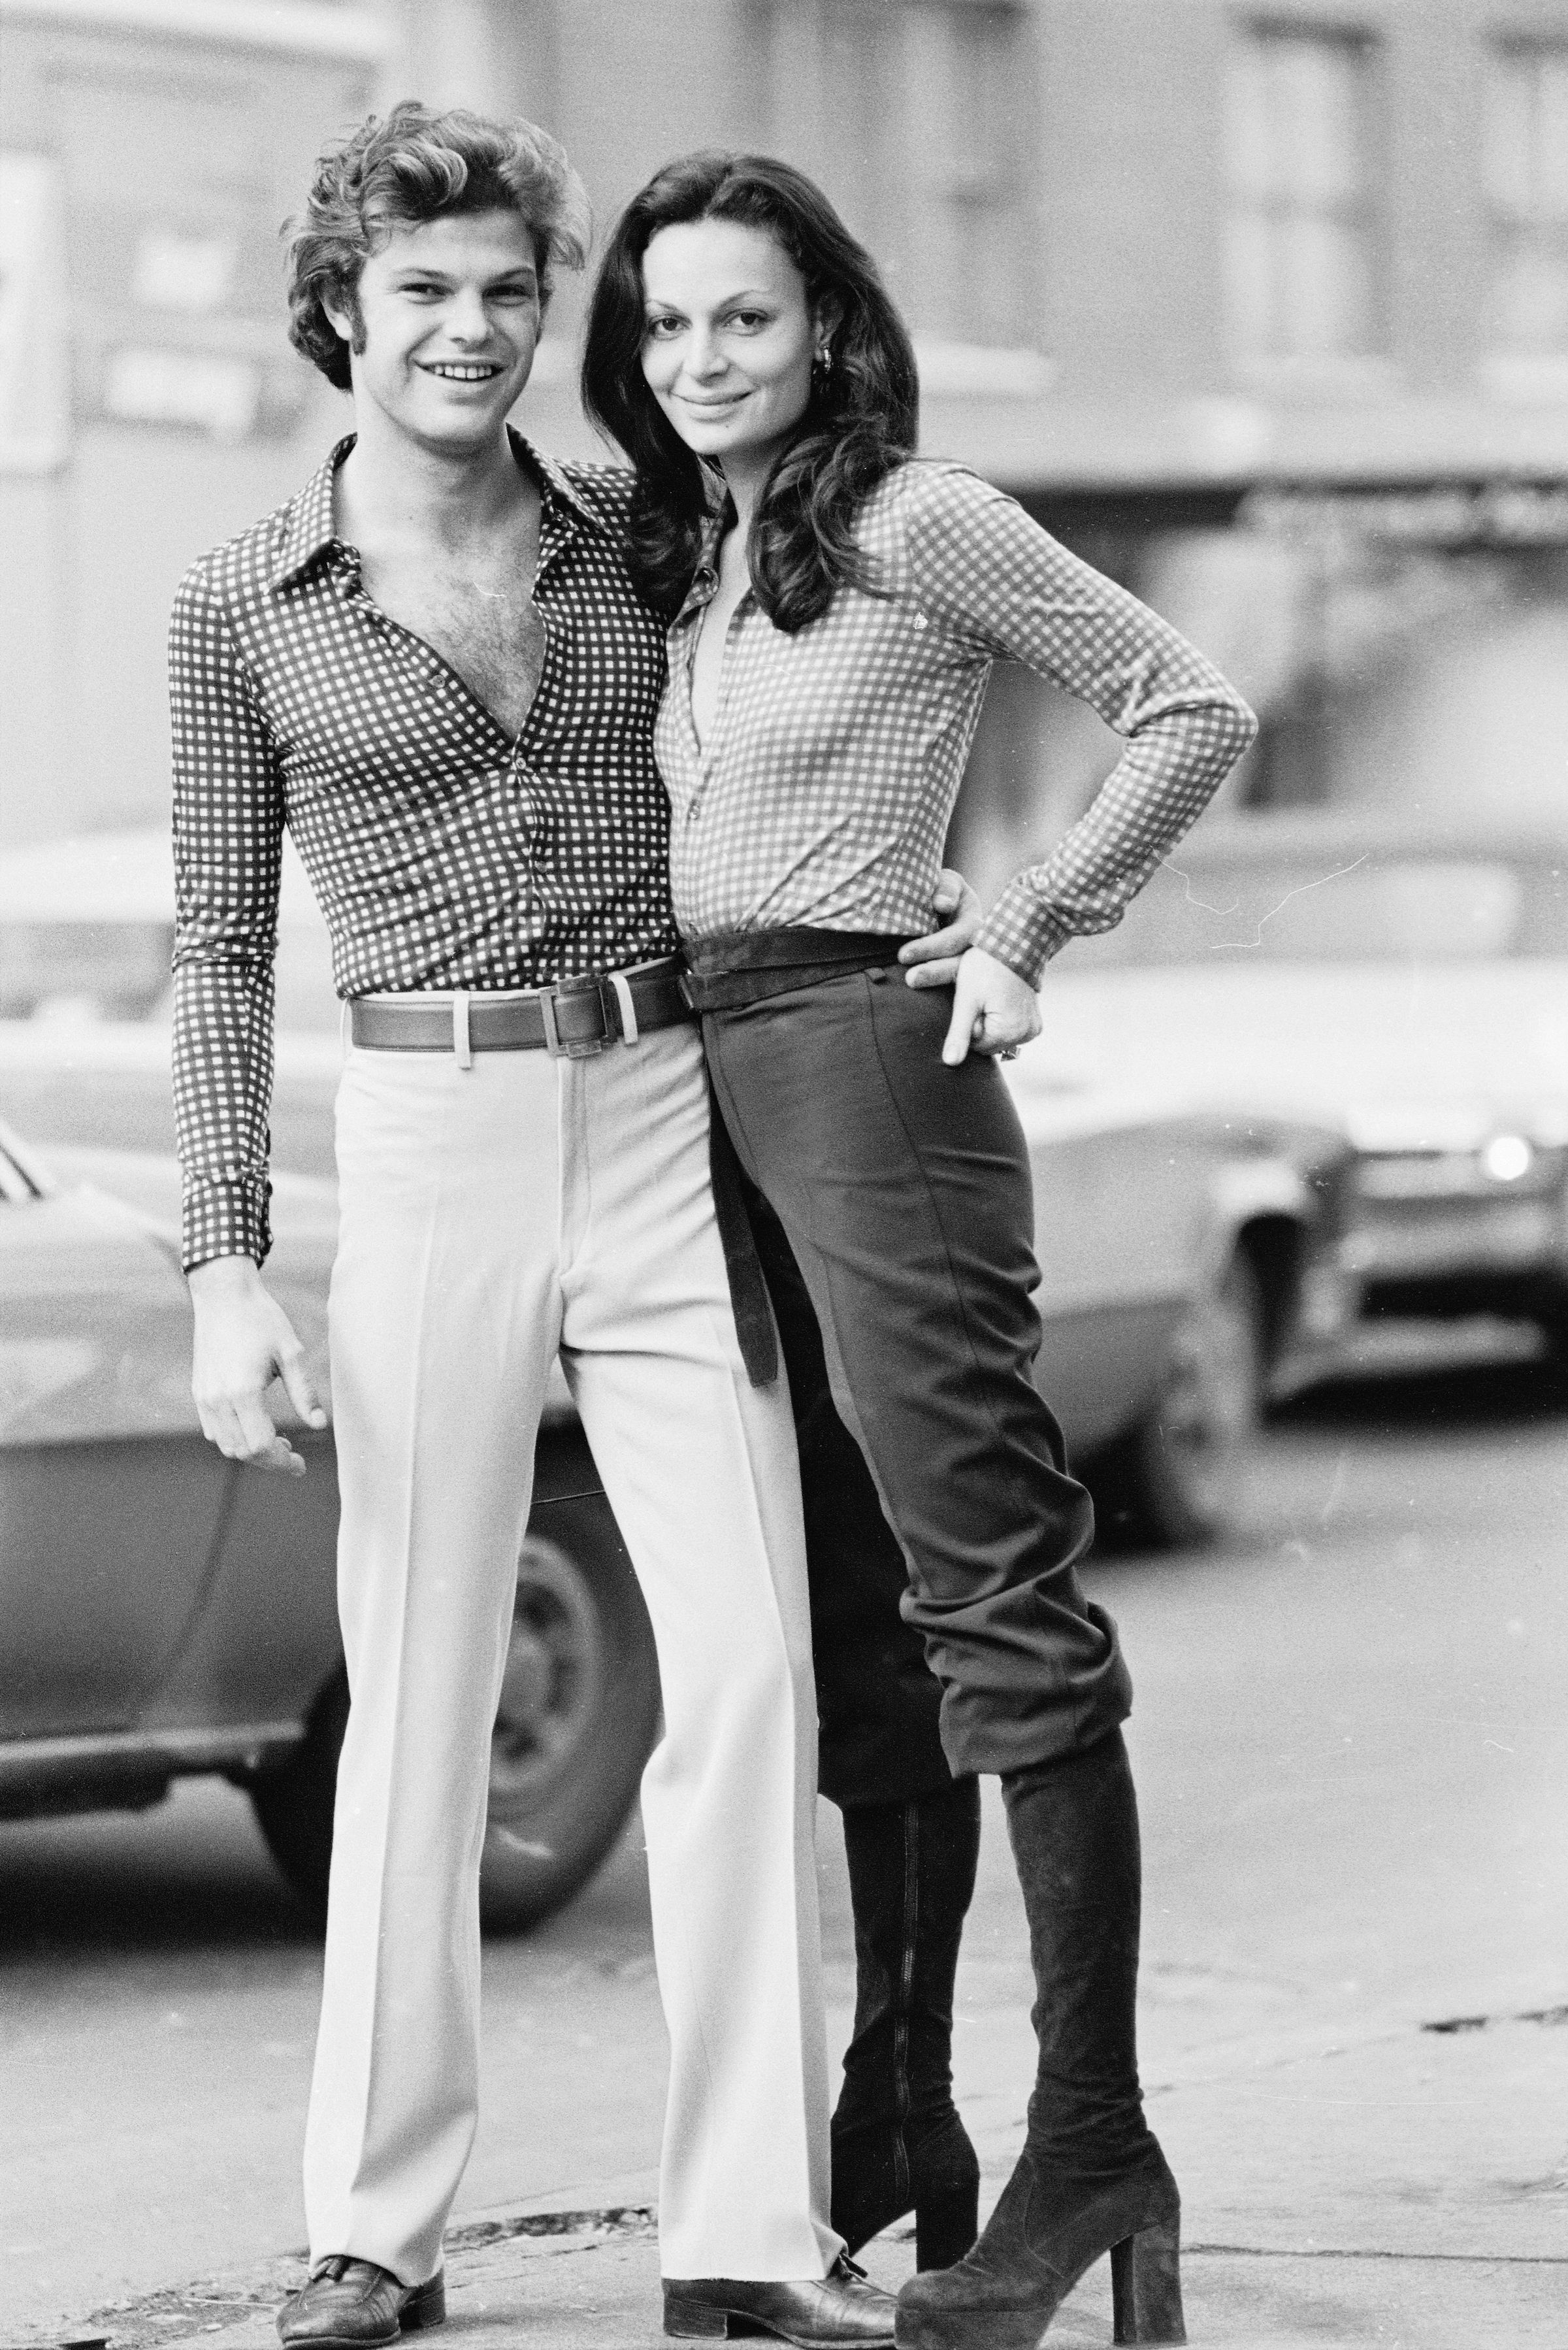 50 Photos That Prove The 70s Was The Decade With The Best Style